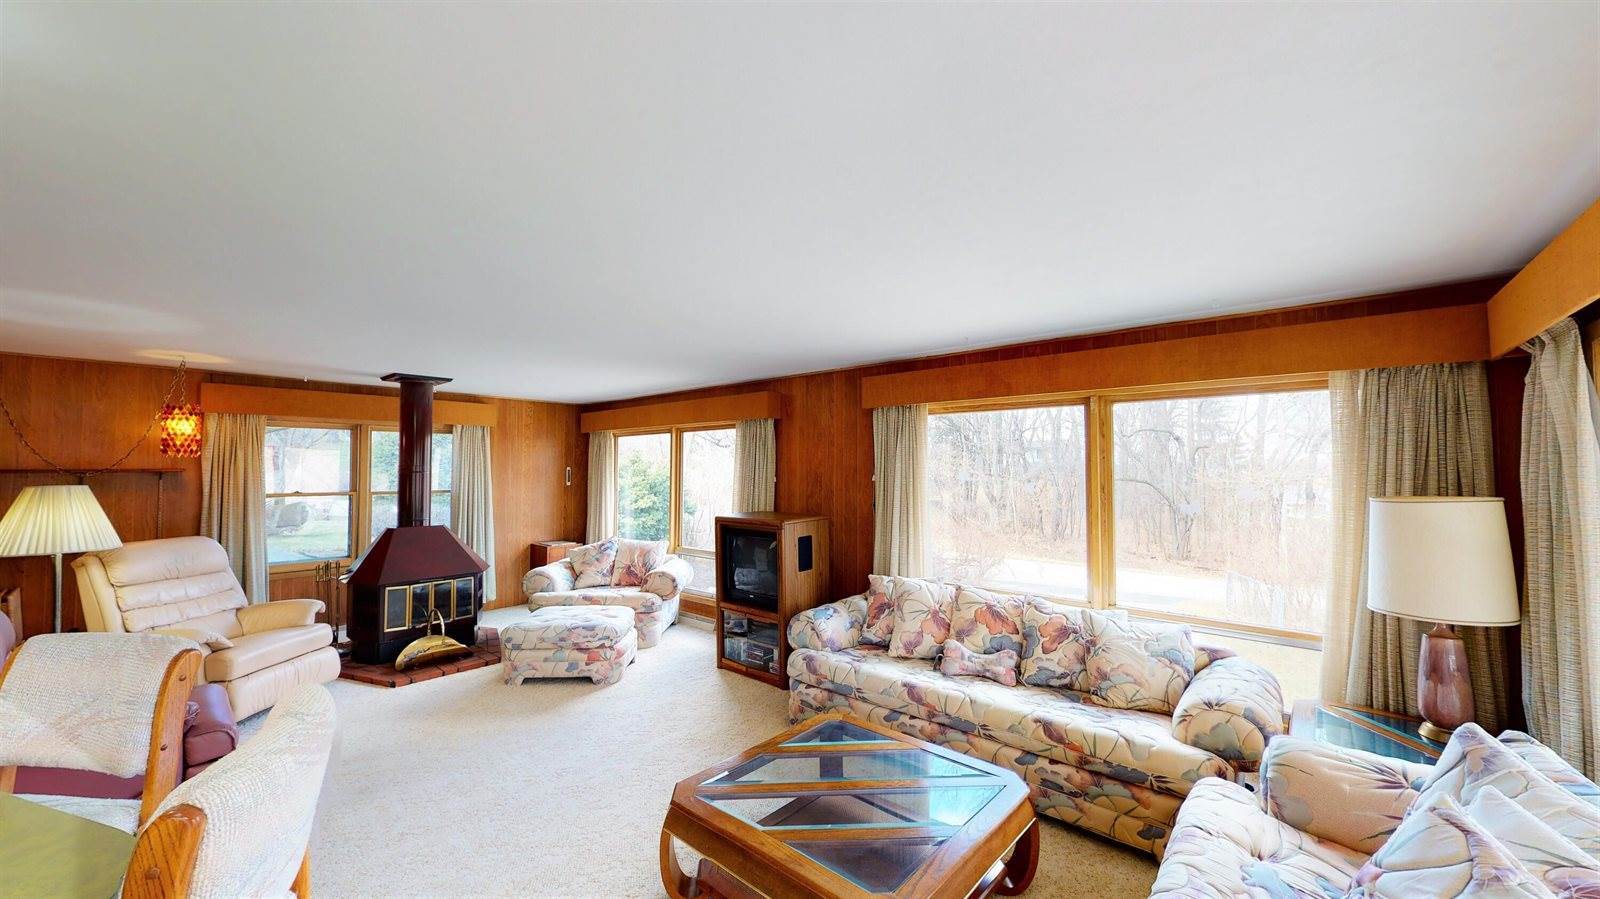 N7376 E Lakeshore Dr, Whitewater, WI 53190